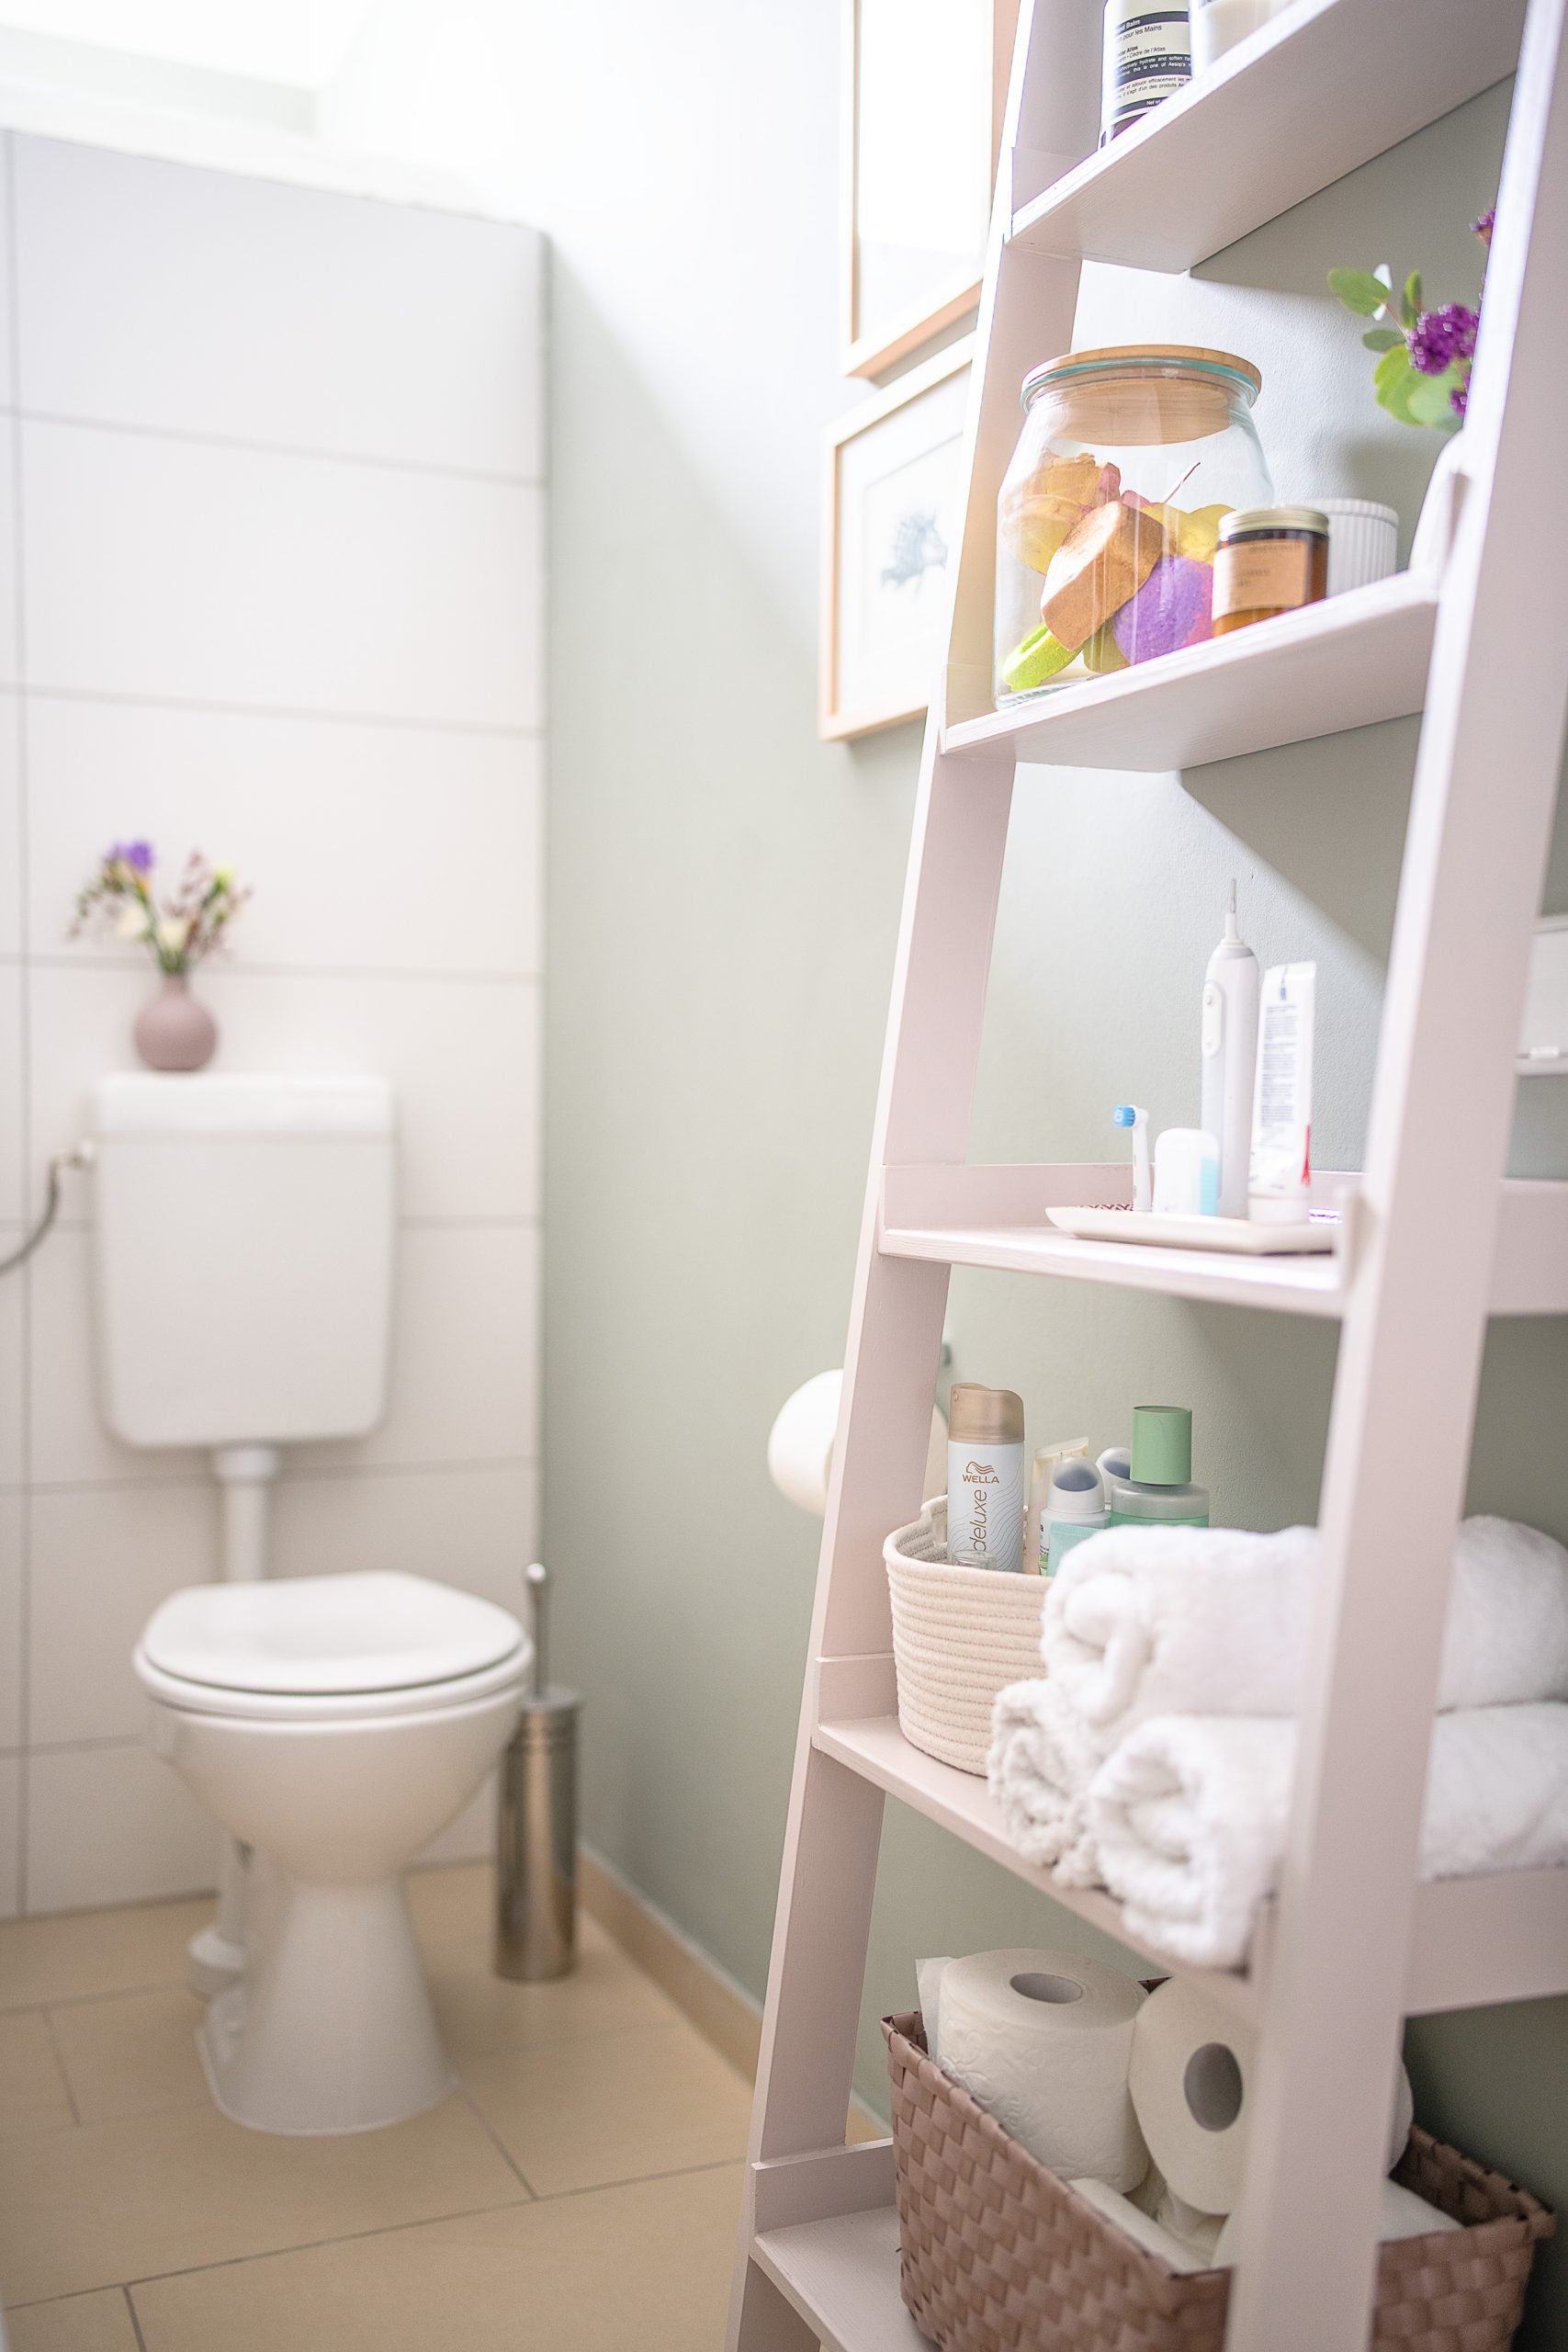 Over the Toilet Storage - Leaning Bathroom Ladder